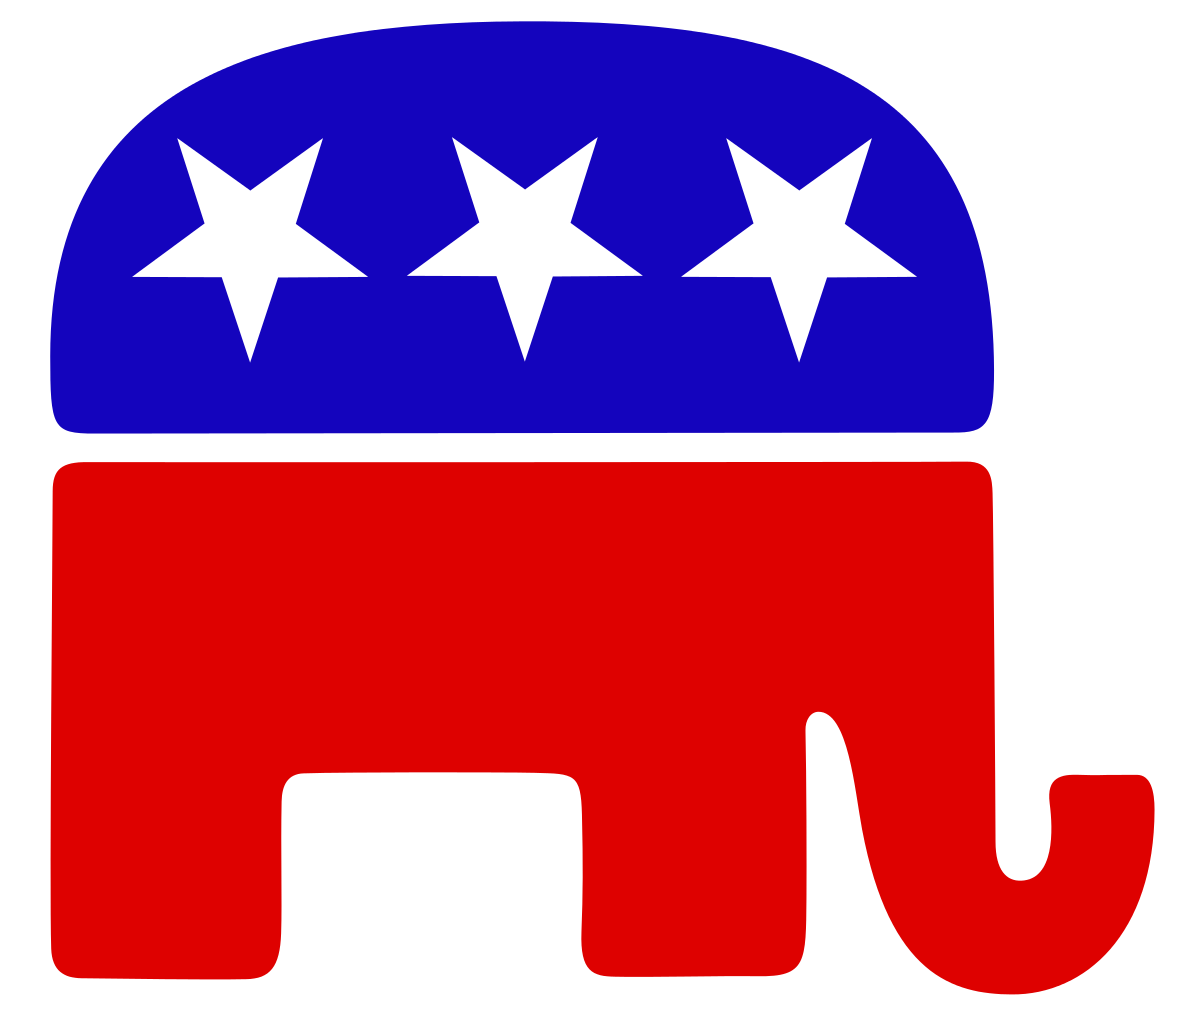 The republican party is. Democracy clipart culture american